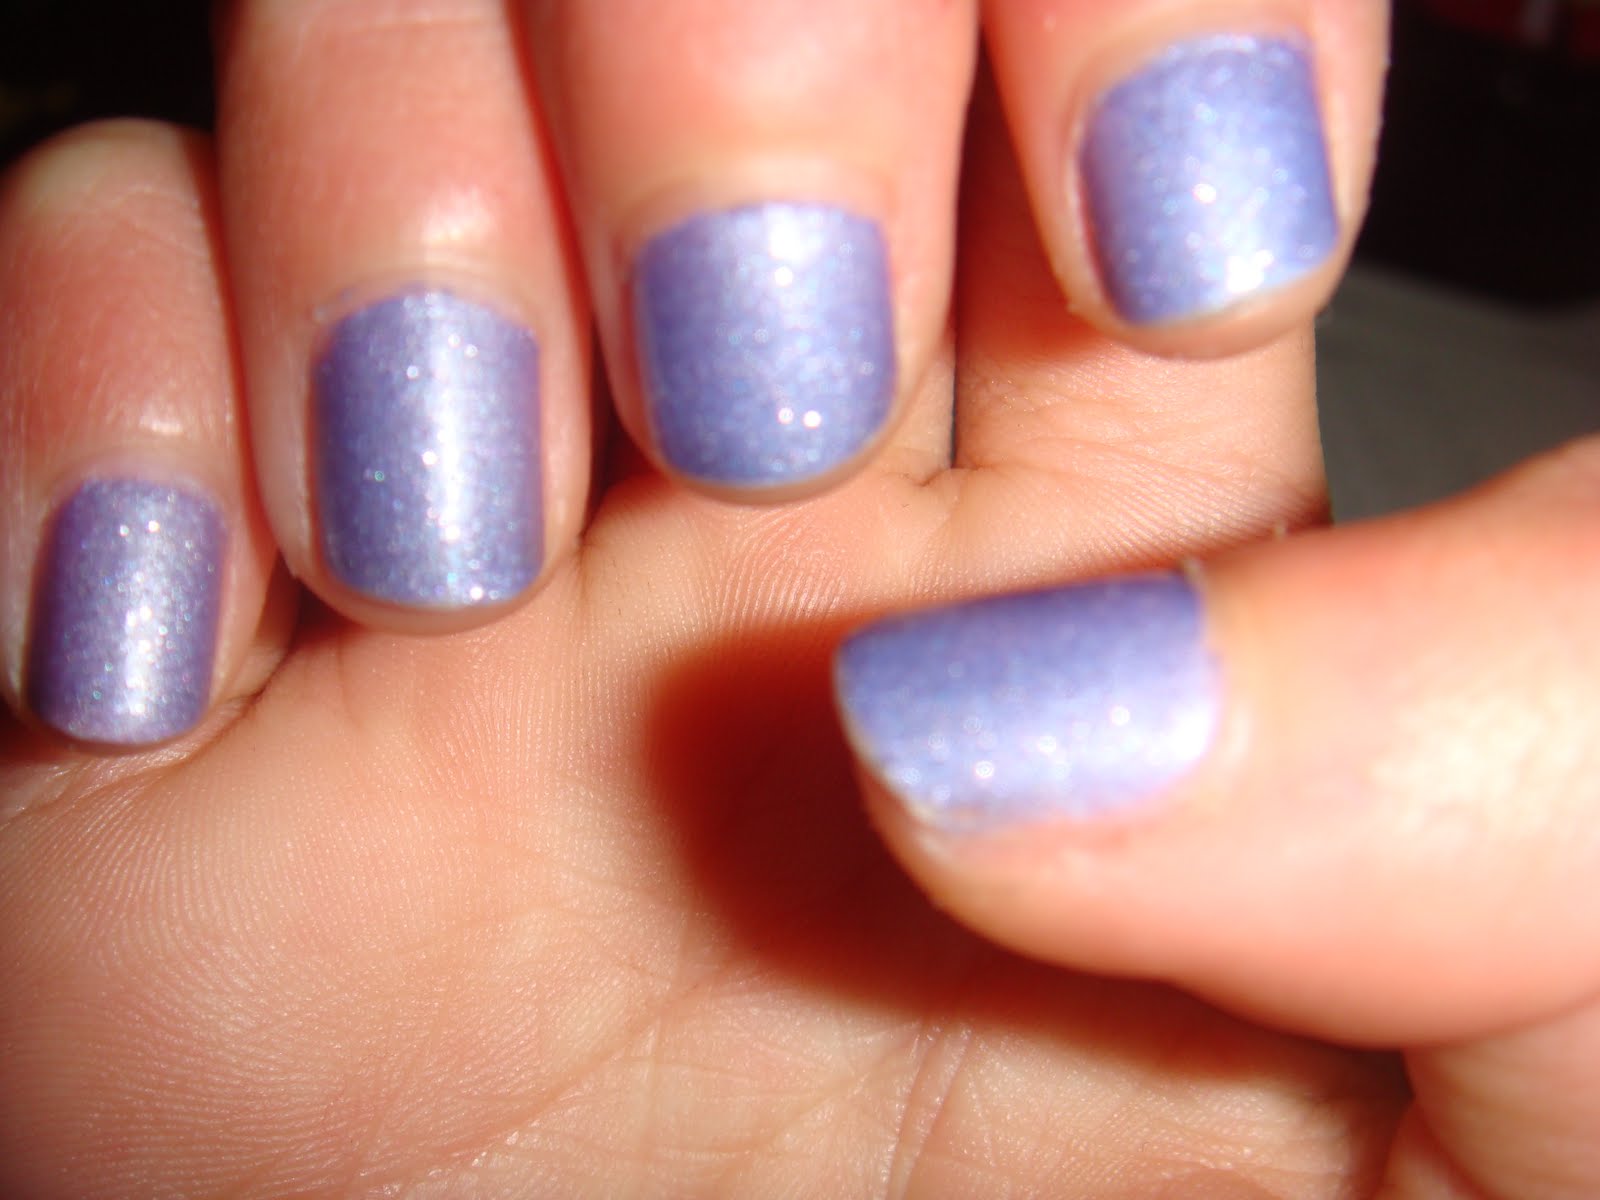 4. "Color-Changing" Nail Polish - wide 5